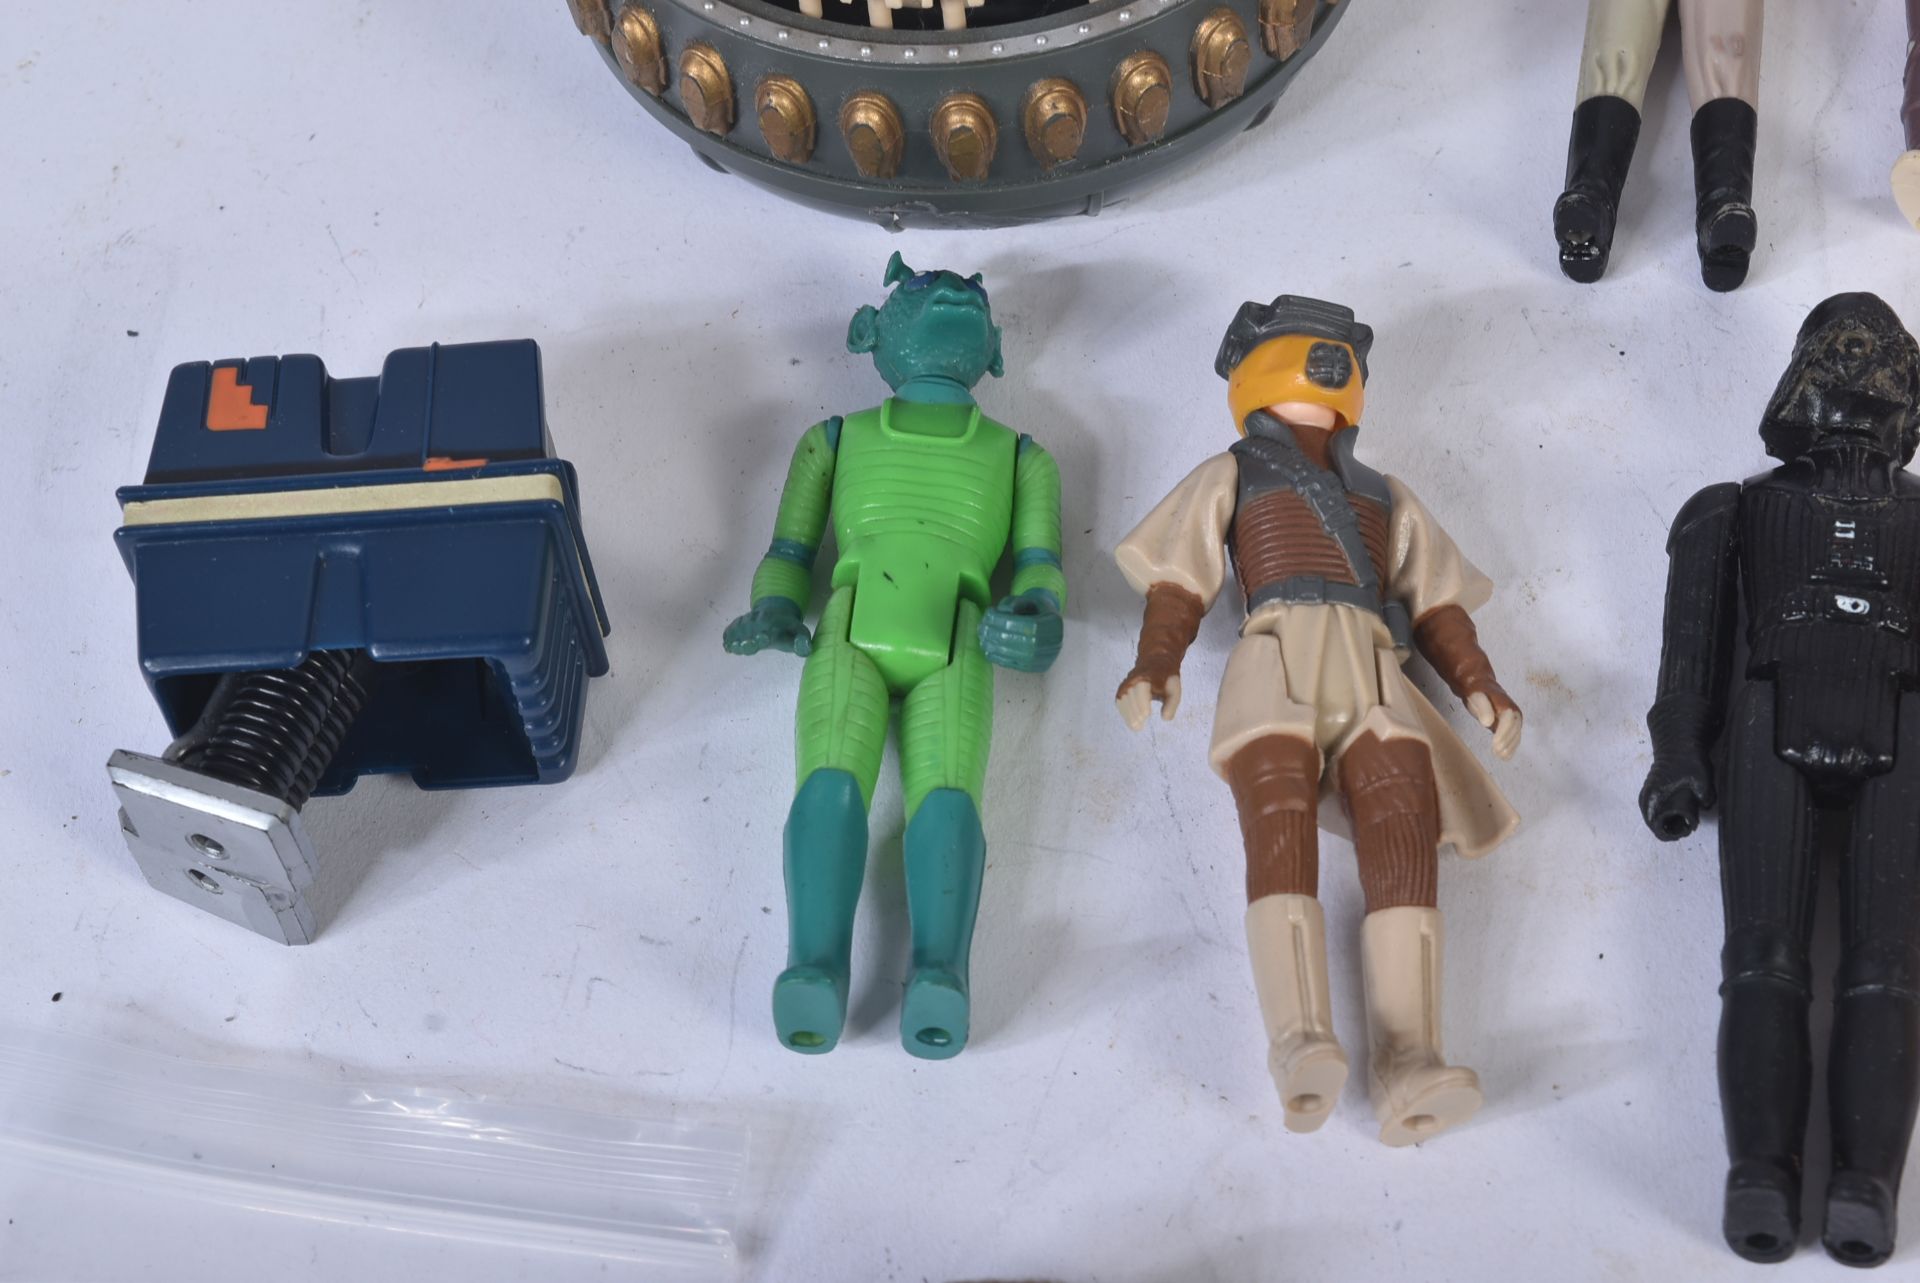 STAR WARS - COLLECTION OF ORIGINAL VINTAGE FIGURES & ACCESSORIES - Image 6 of 9